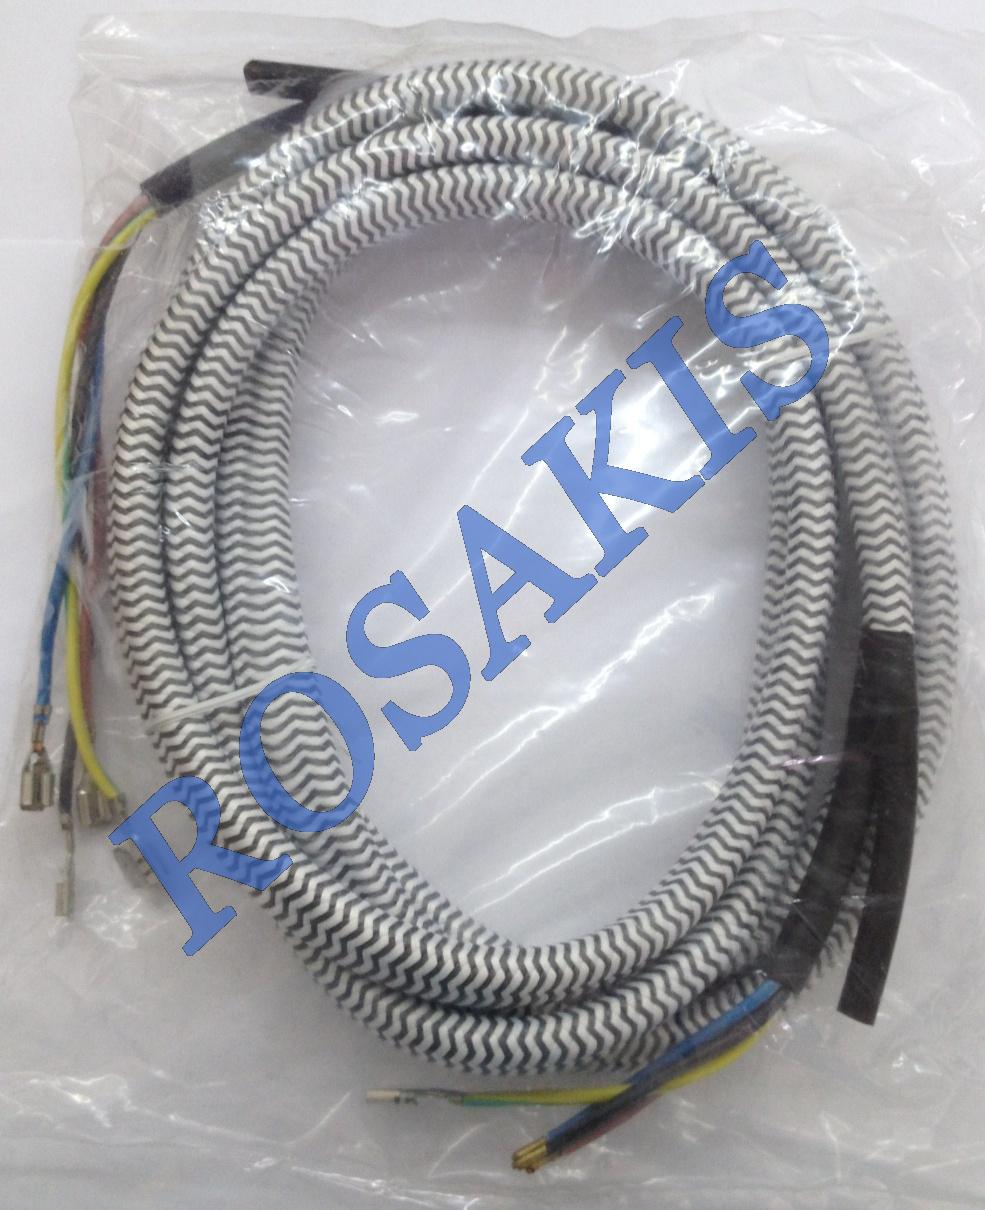 IRON SYSTEM CABLE CURENT AND STREAM STIRELLA DOUBLE ORIGINAL